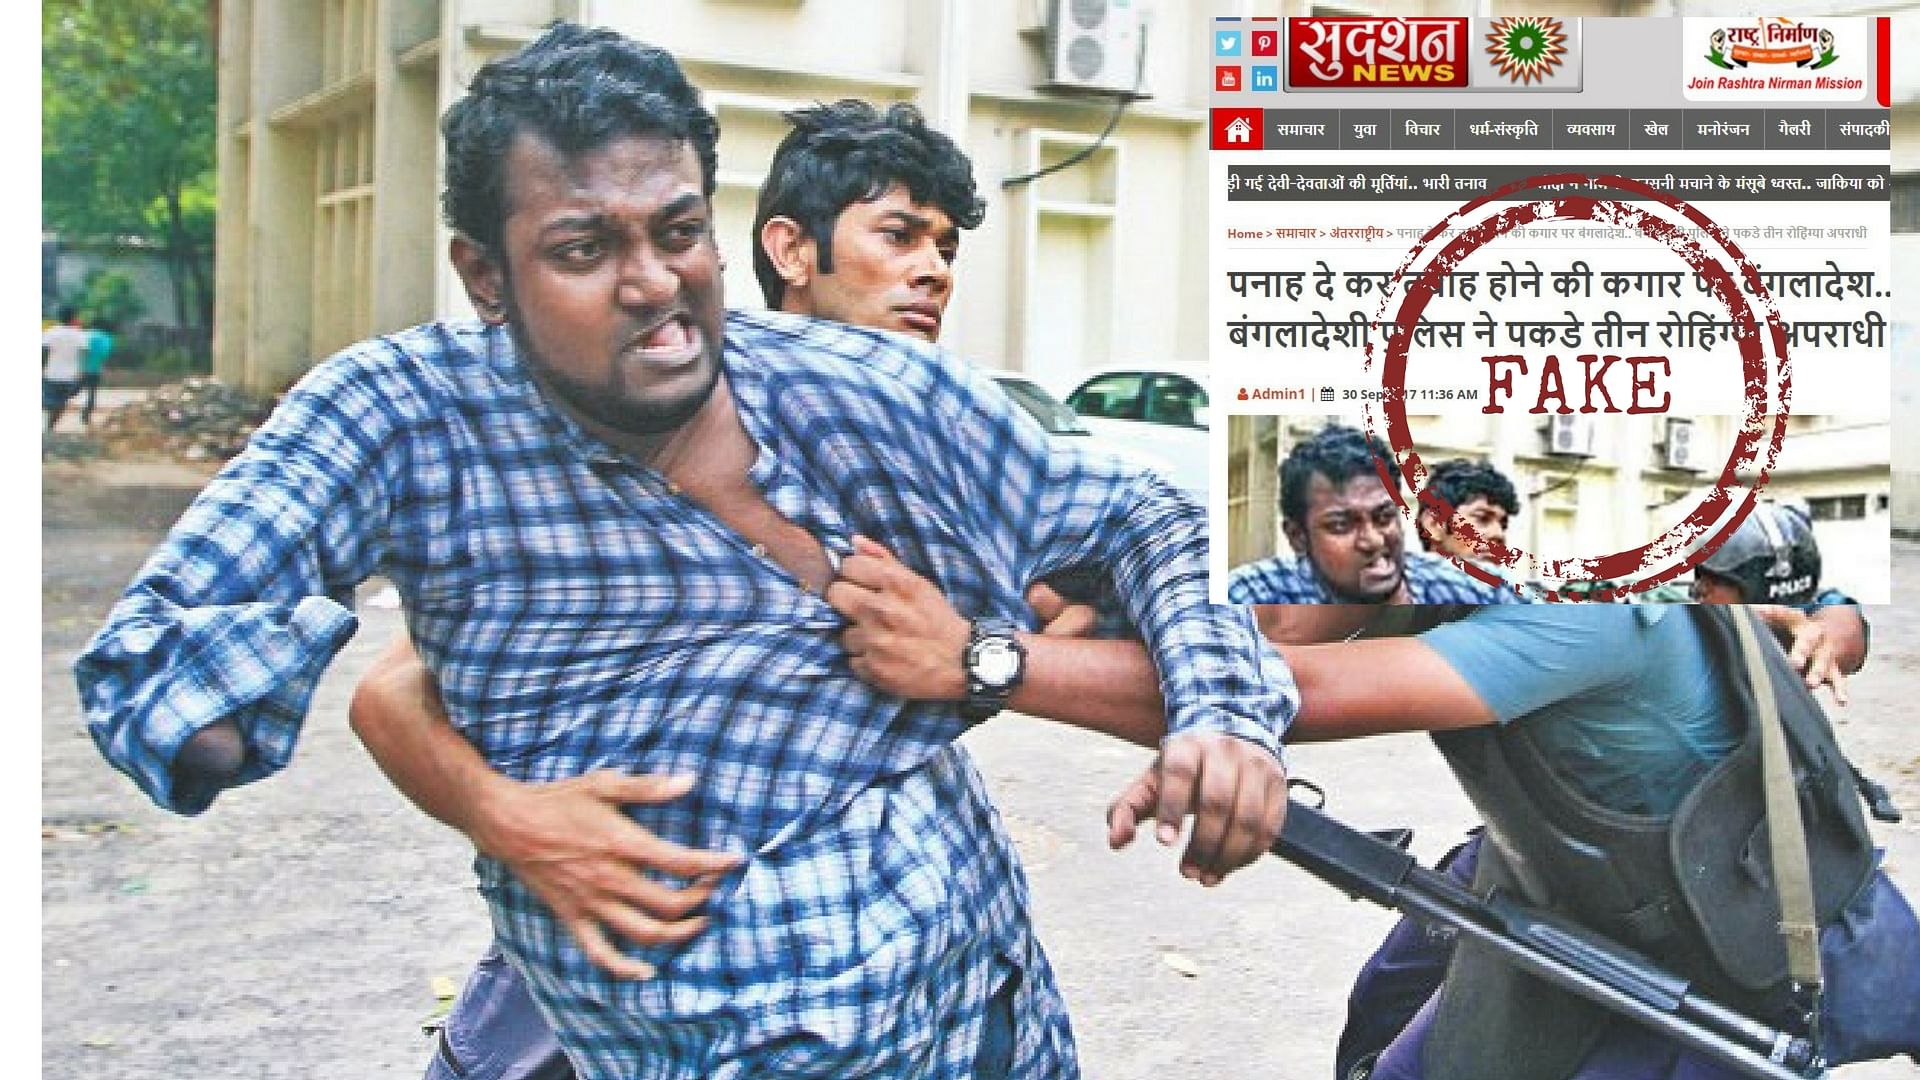 The photo of a disabled man being dragged by Bangladeshi police officer was being wrongly used.